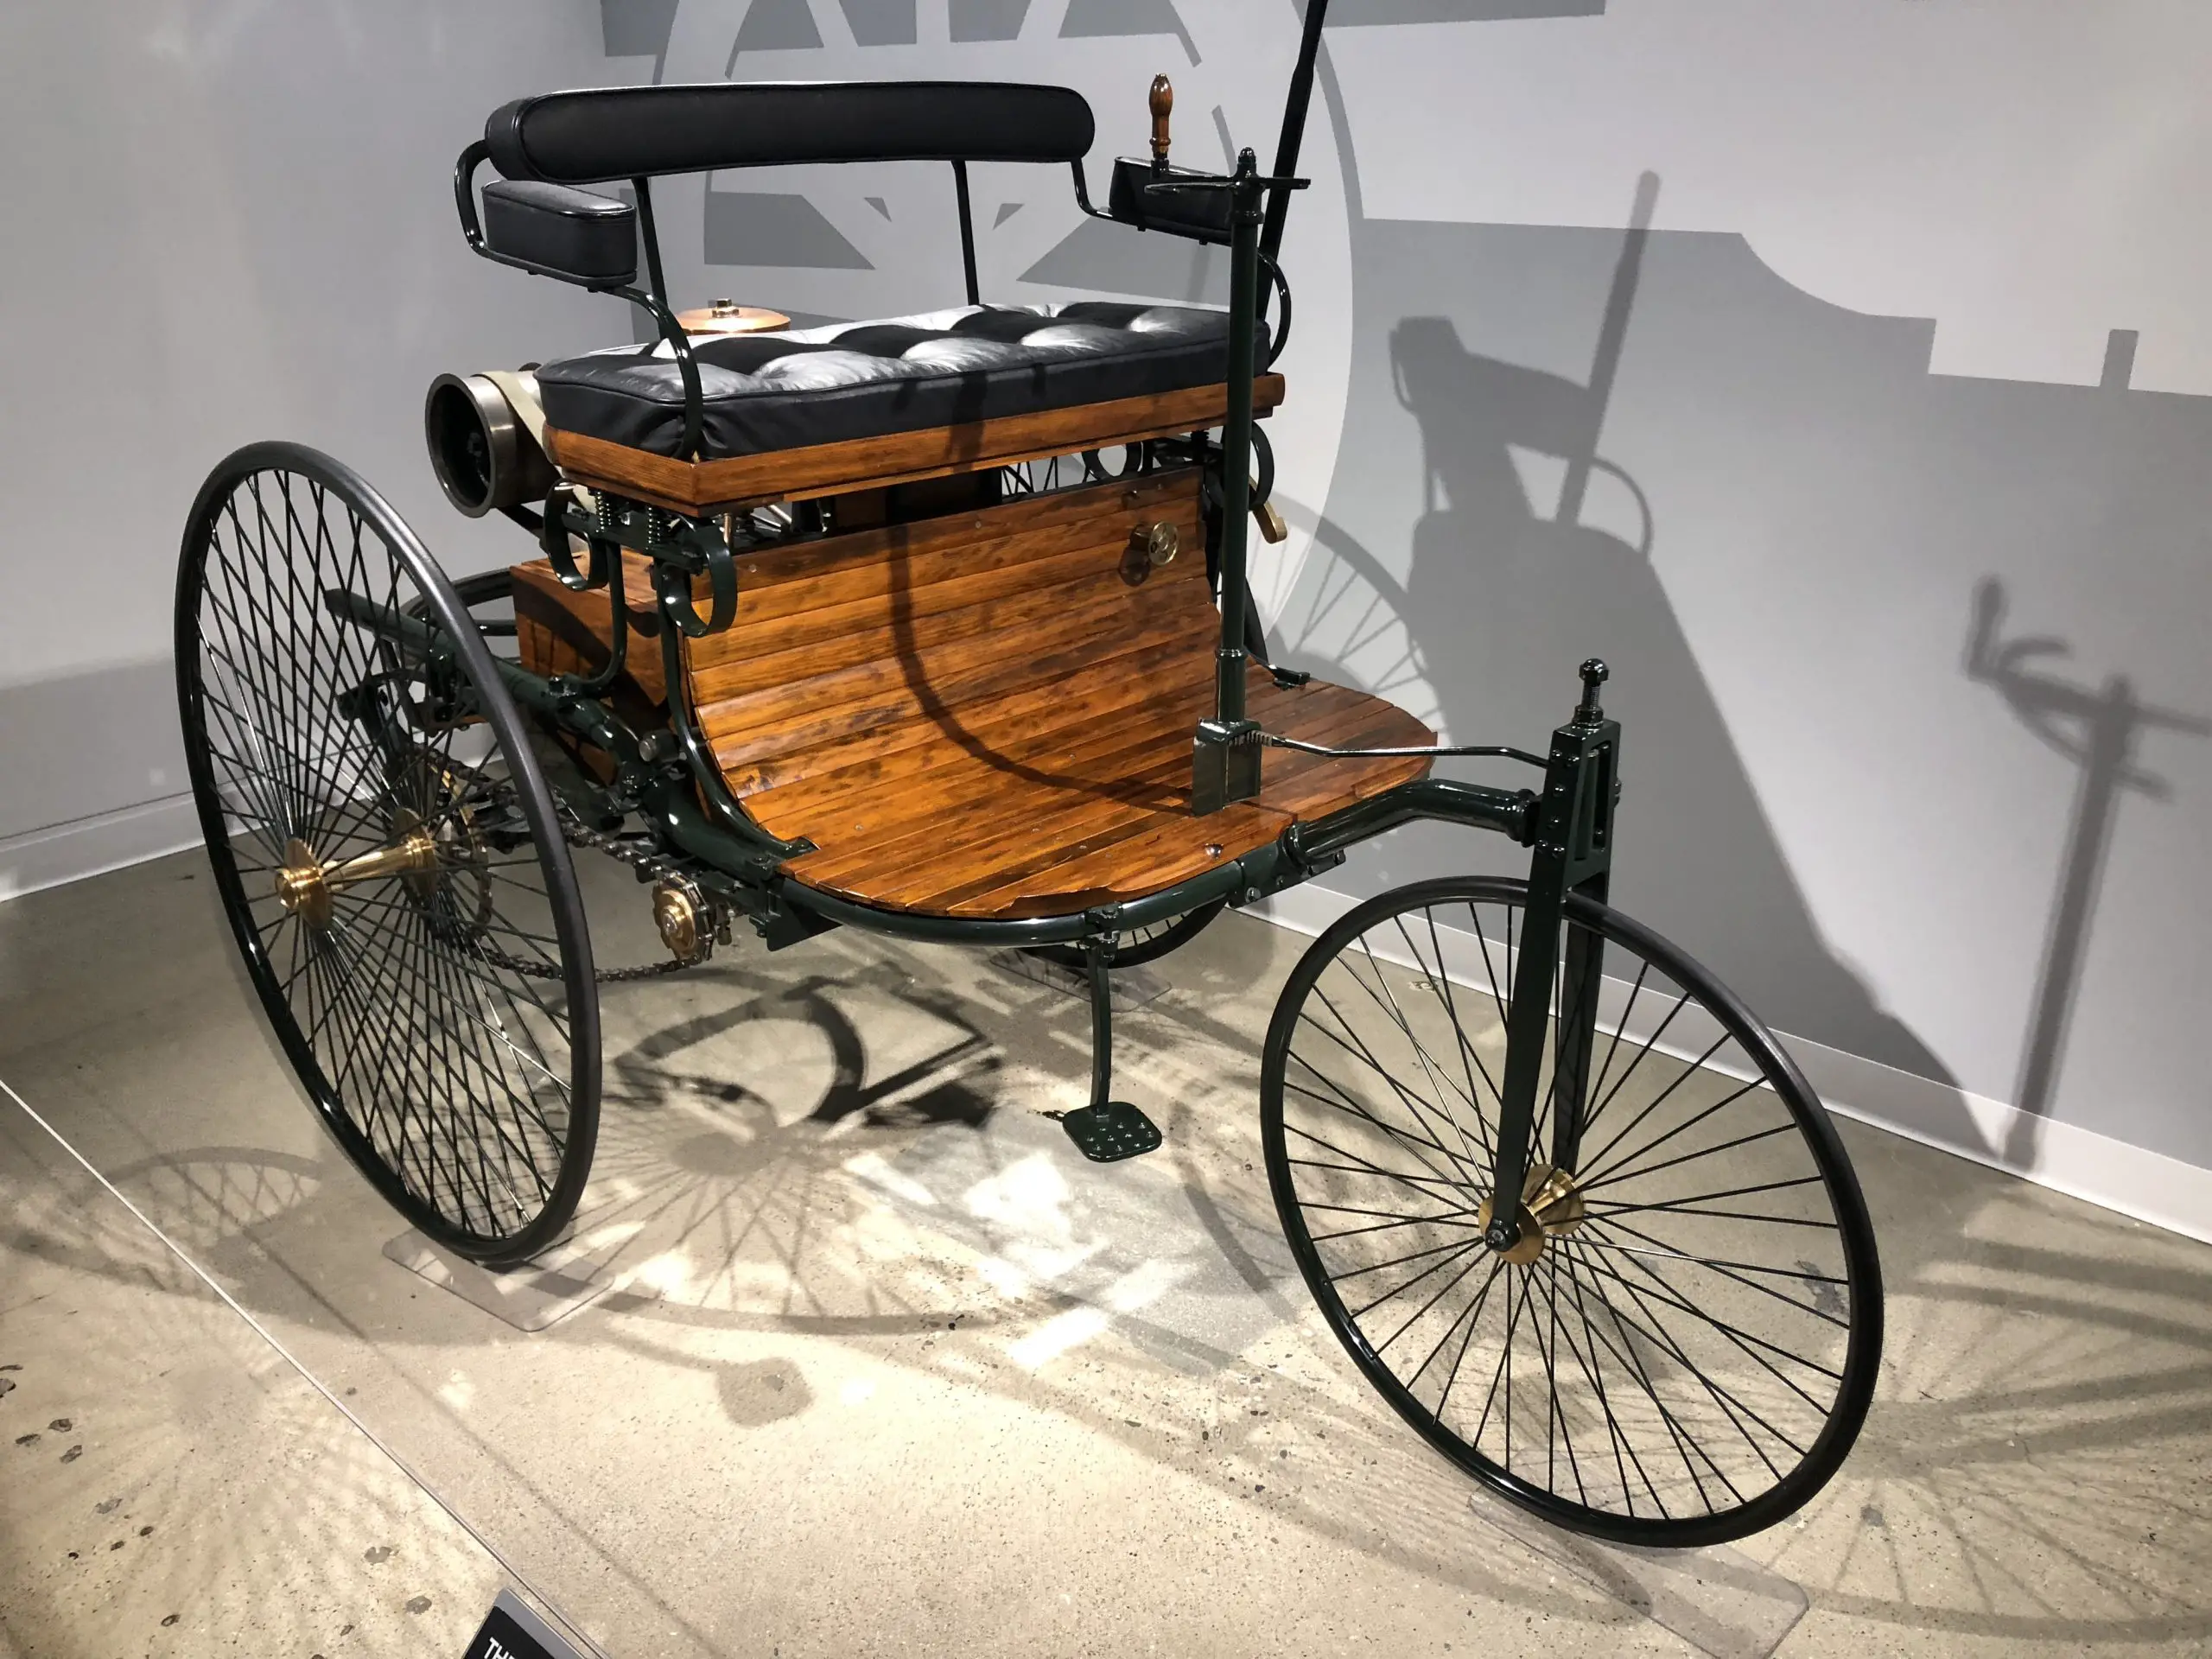 The first car, built by Karl Benz.